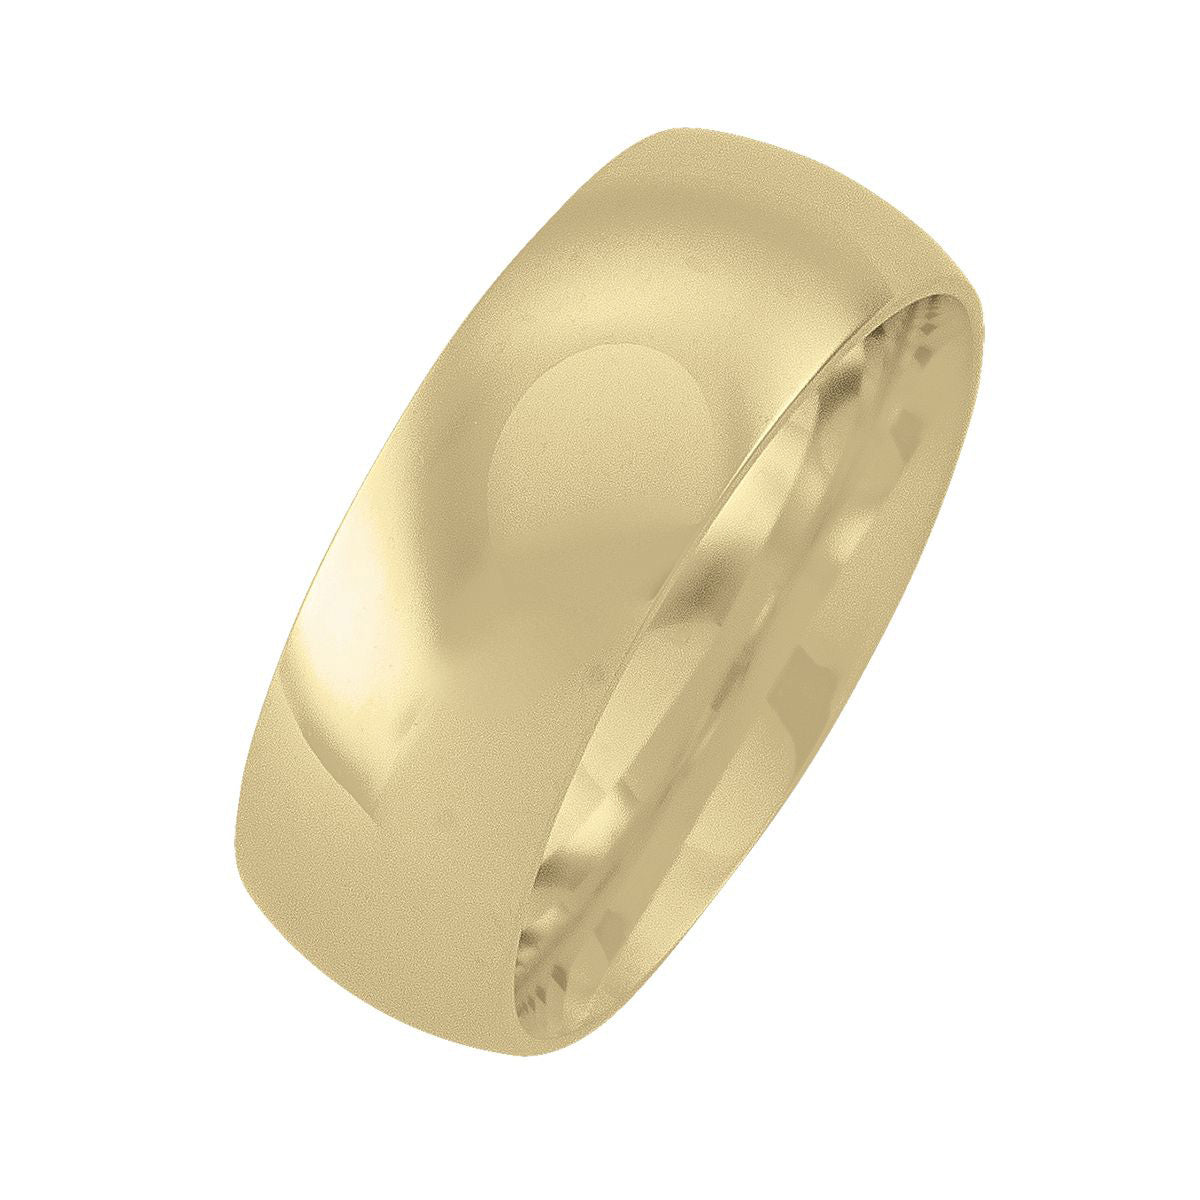 WB0107A, Gold Wedding Band, 7 mm, Domed Top, Inside Comfort Fit